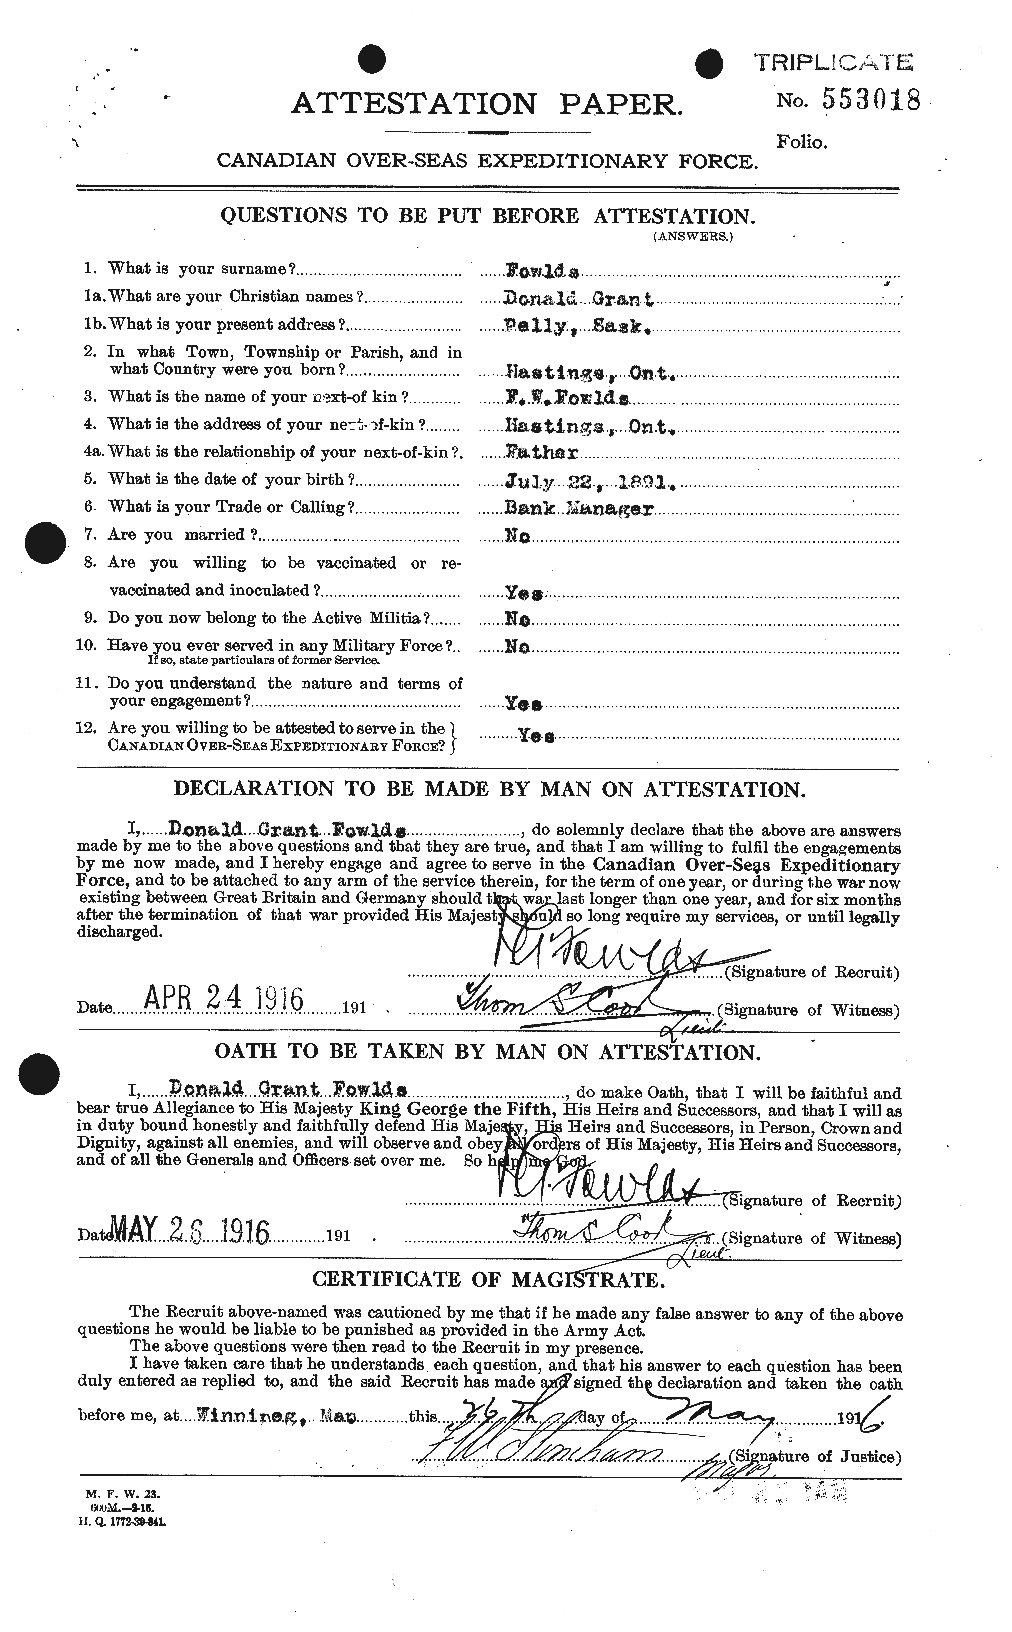 Personnel Records of the First World War - CEF 332948a